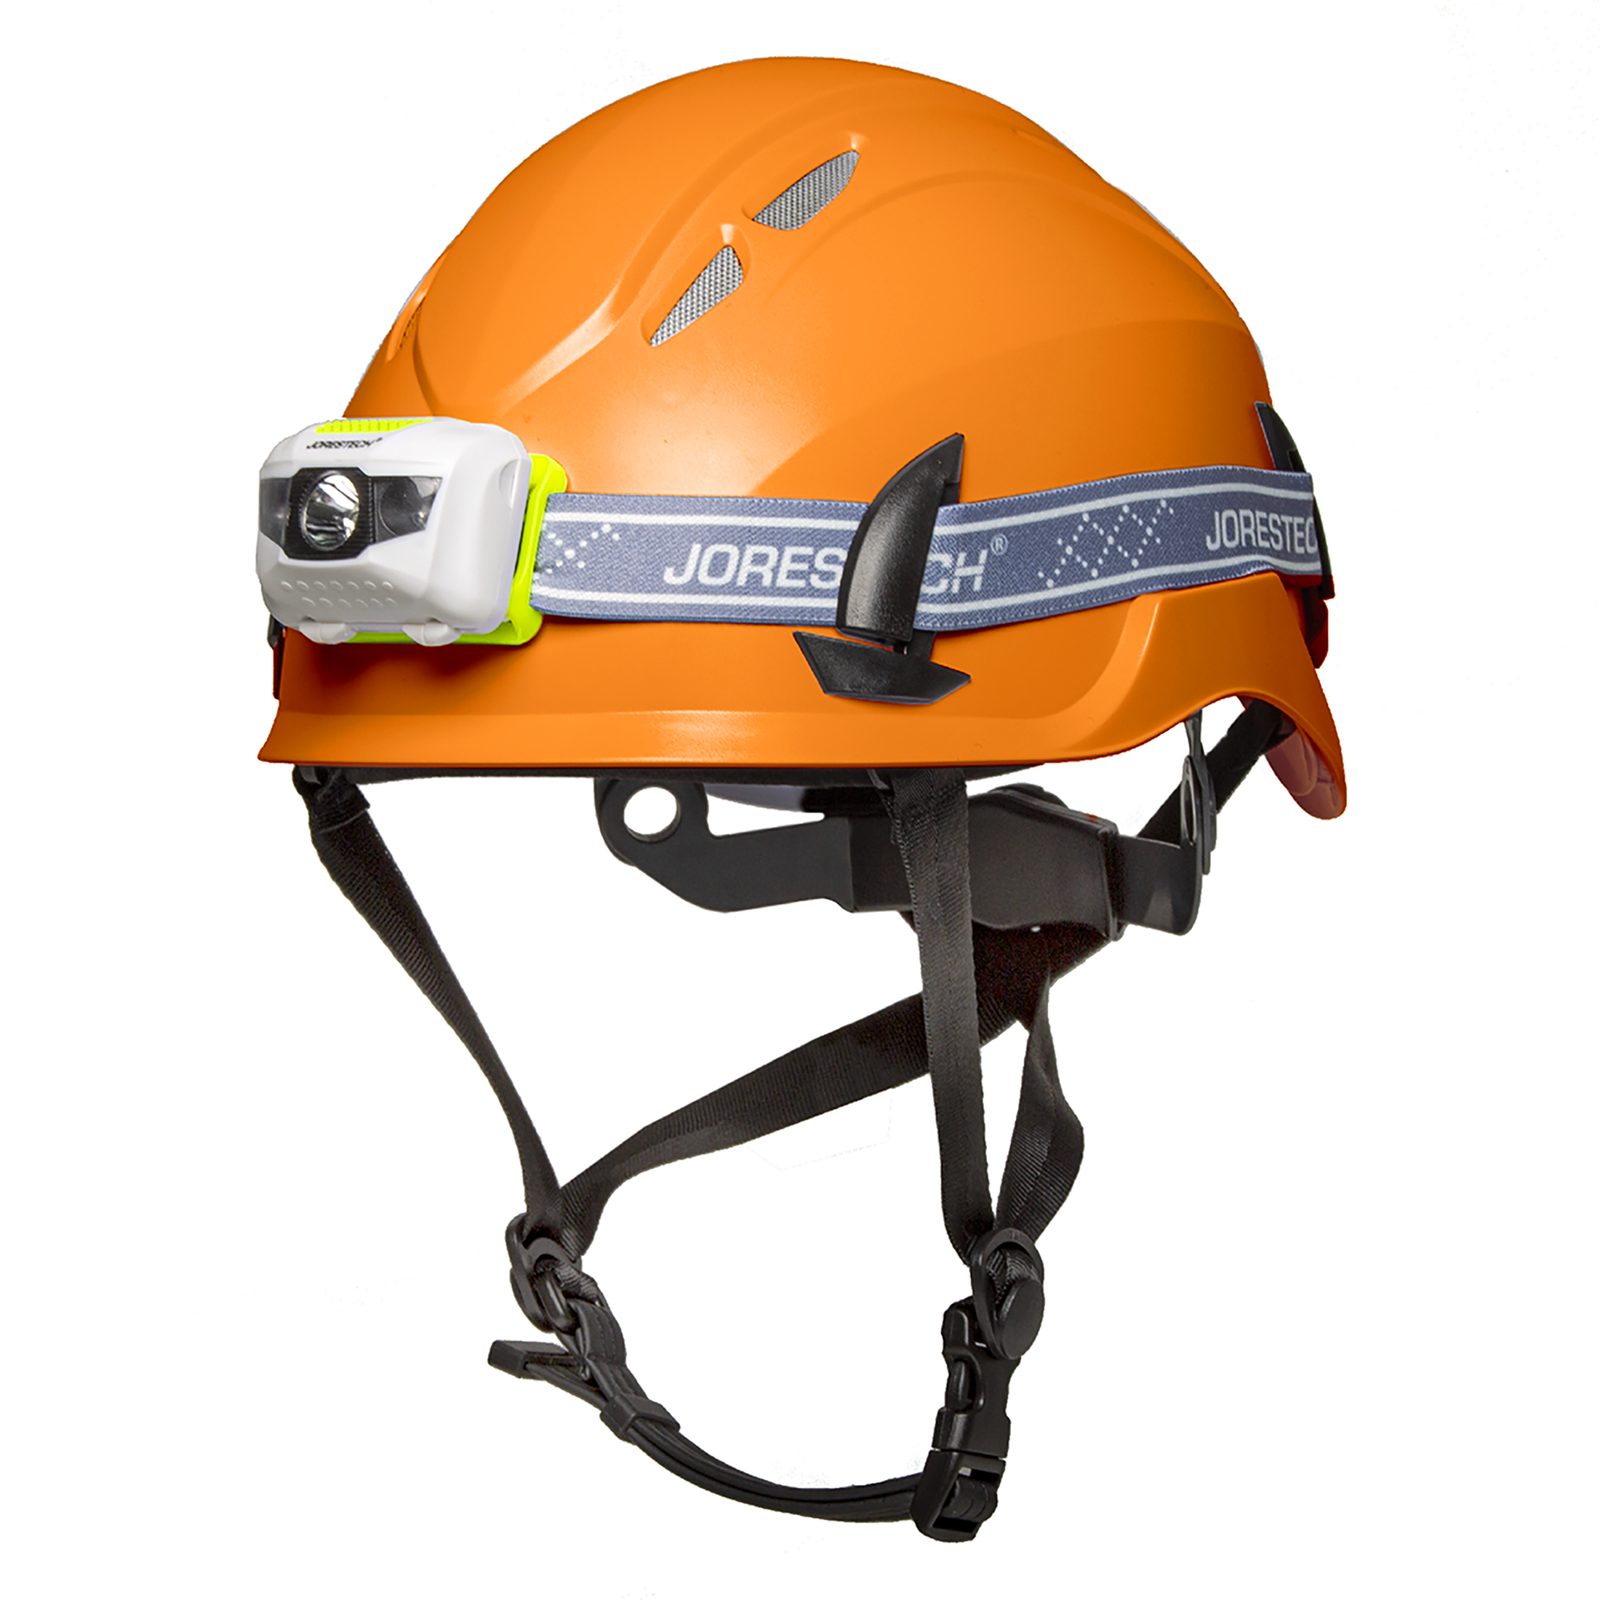 Diagonal view of an orange ventilated JORESTECH hard hat with chin strap and a white water resistant headlamp bundle